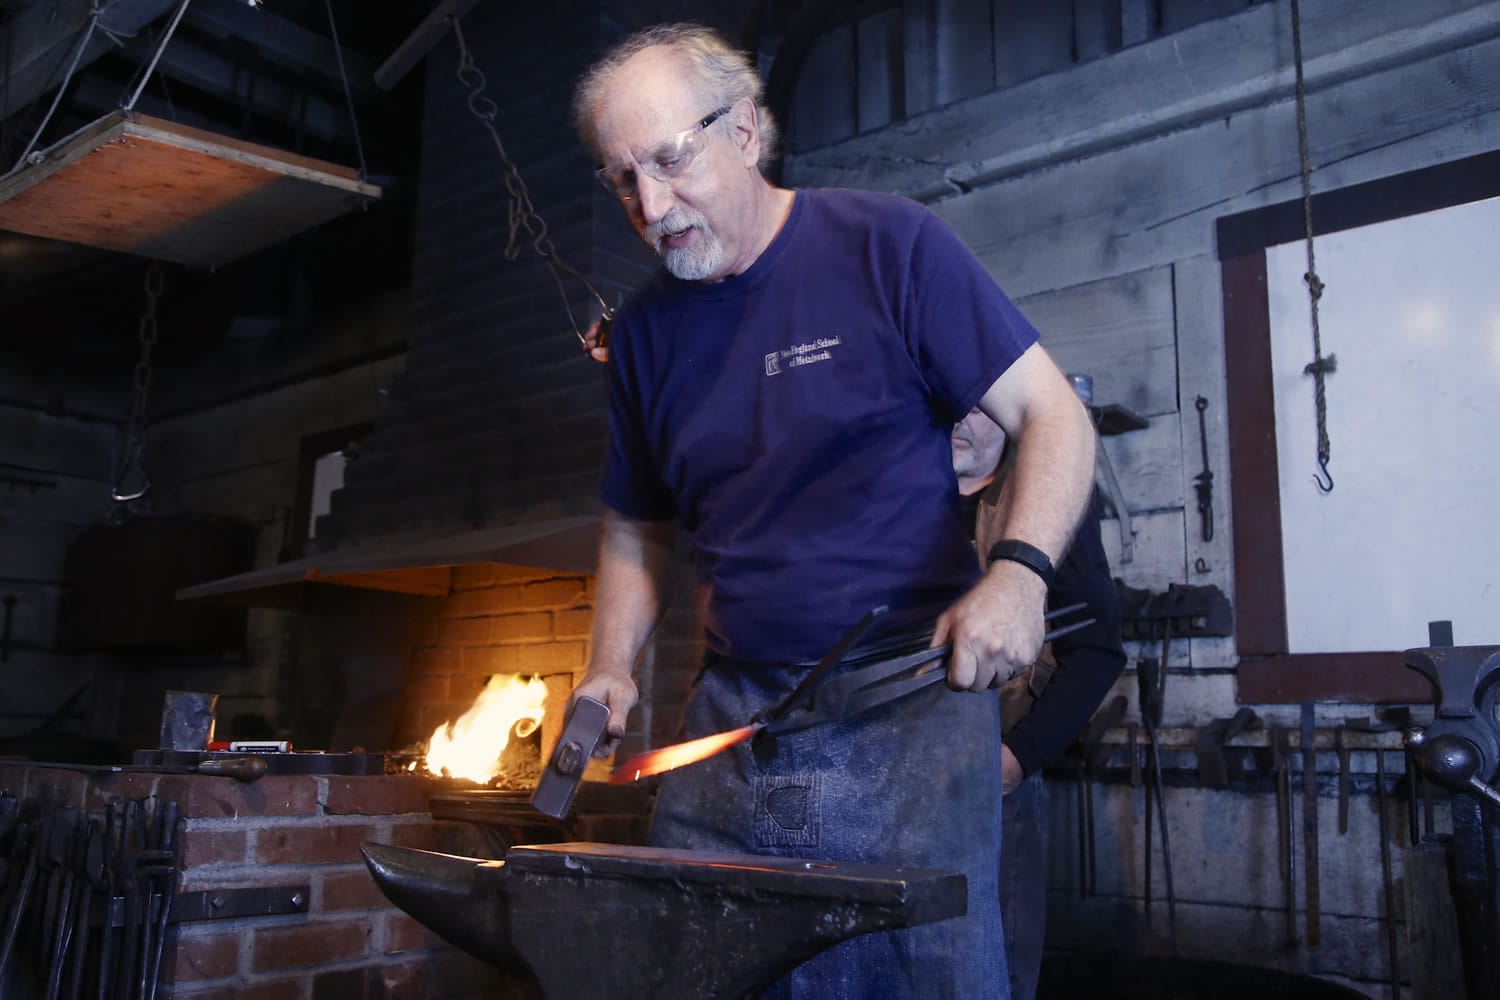 Master blacksmith Jay Close uses a hammer and anvil to flatten metal that will be curved to hold the handle of a garden rake.